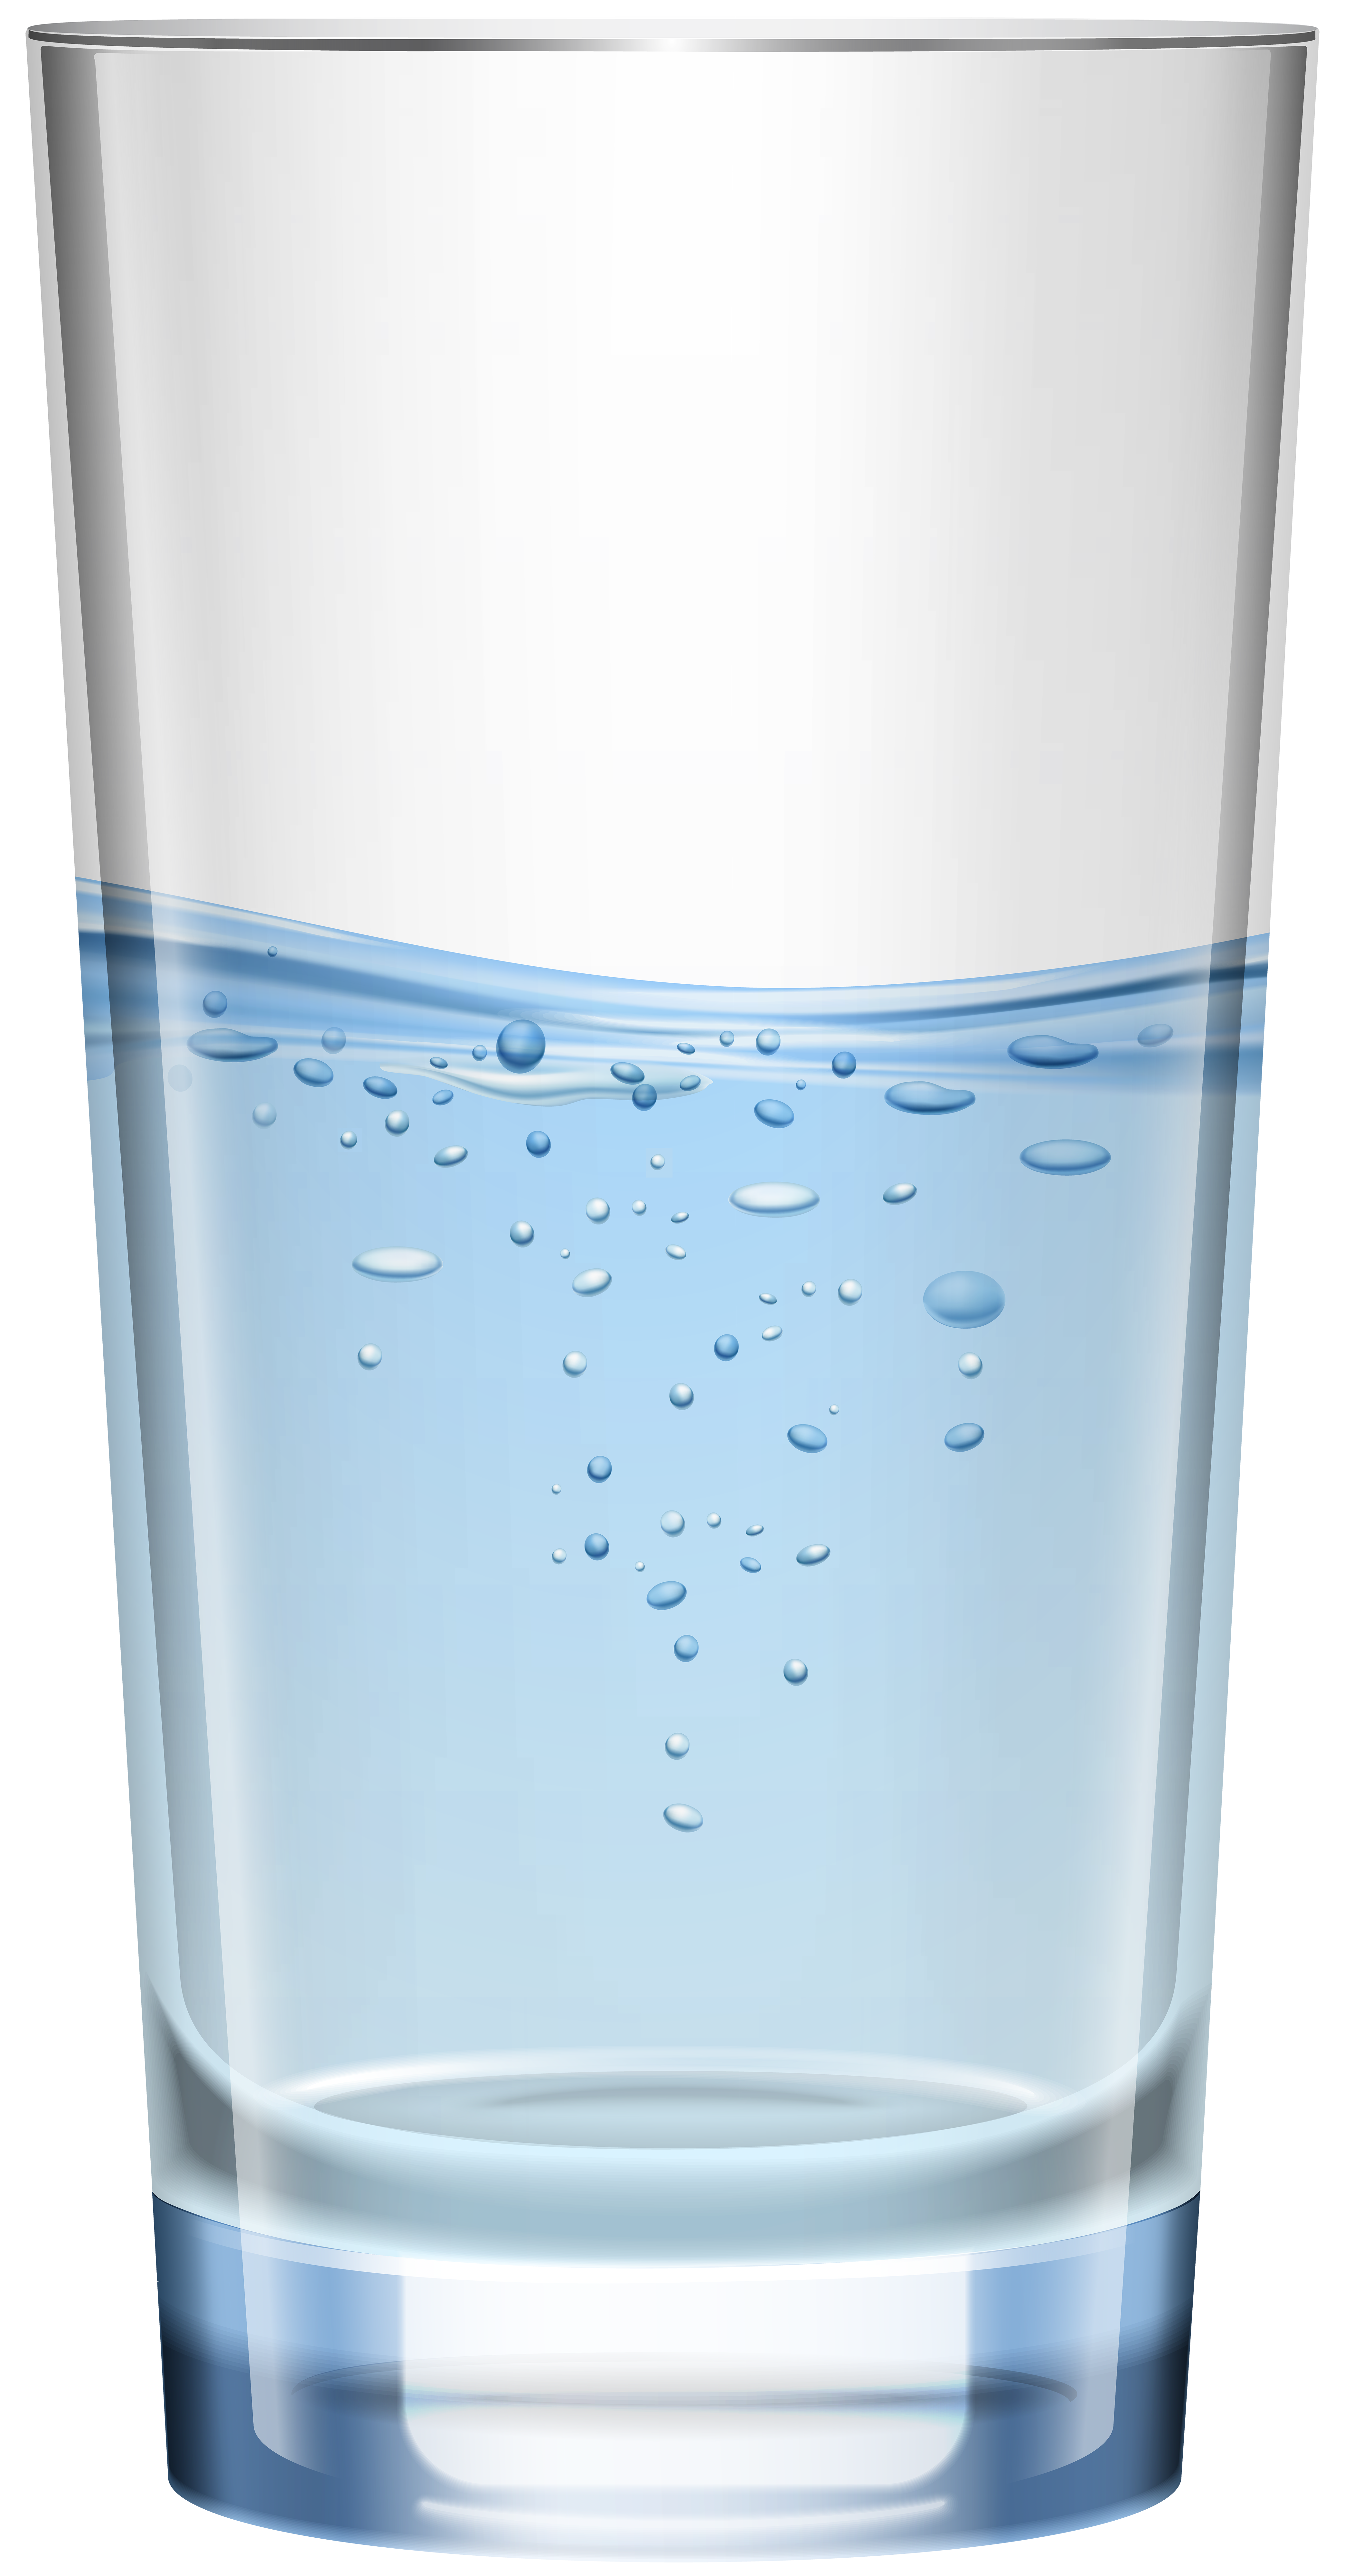 Cup Water Glass , drink water transparent background PNG clipart